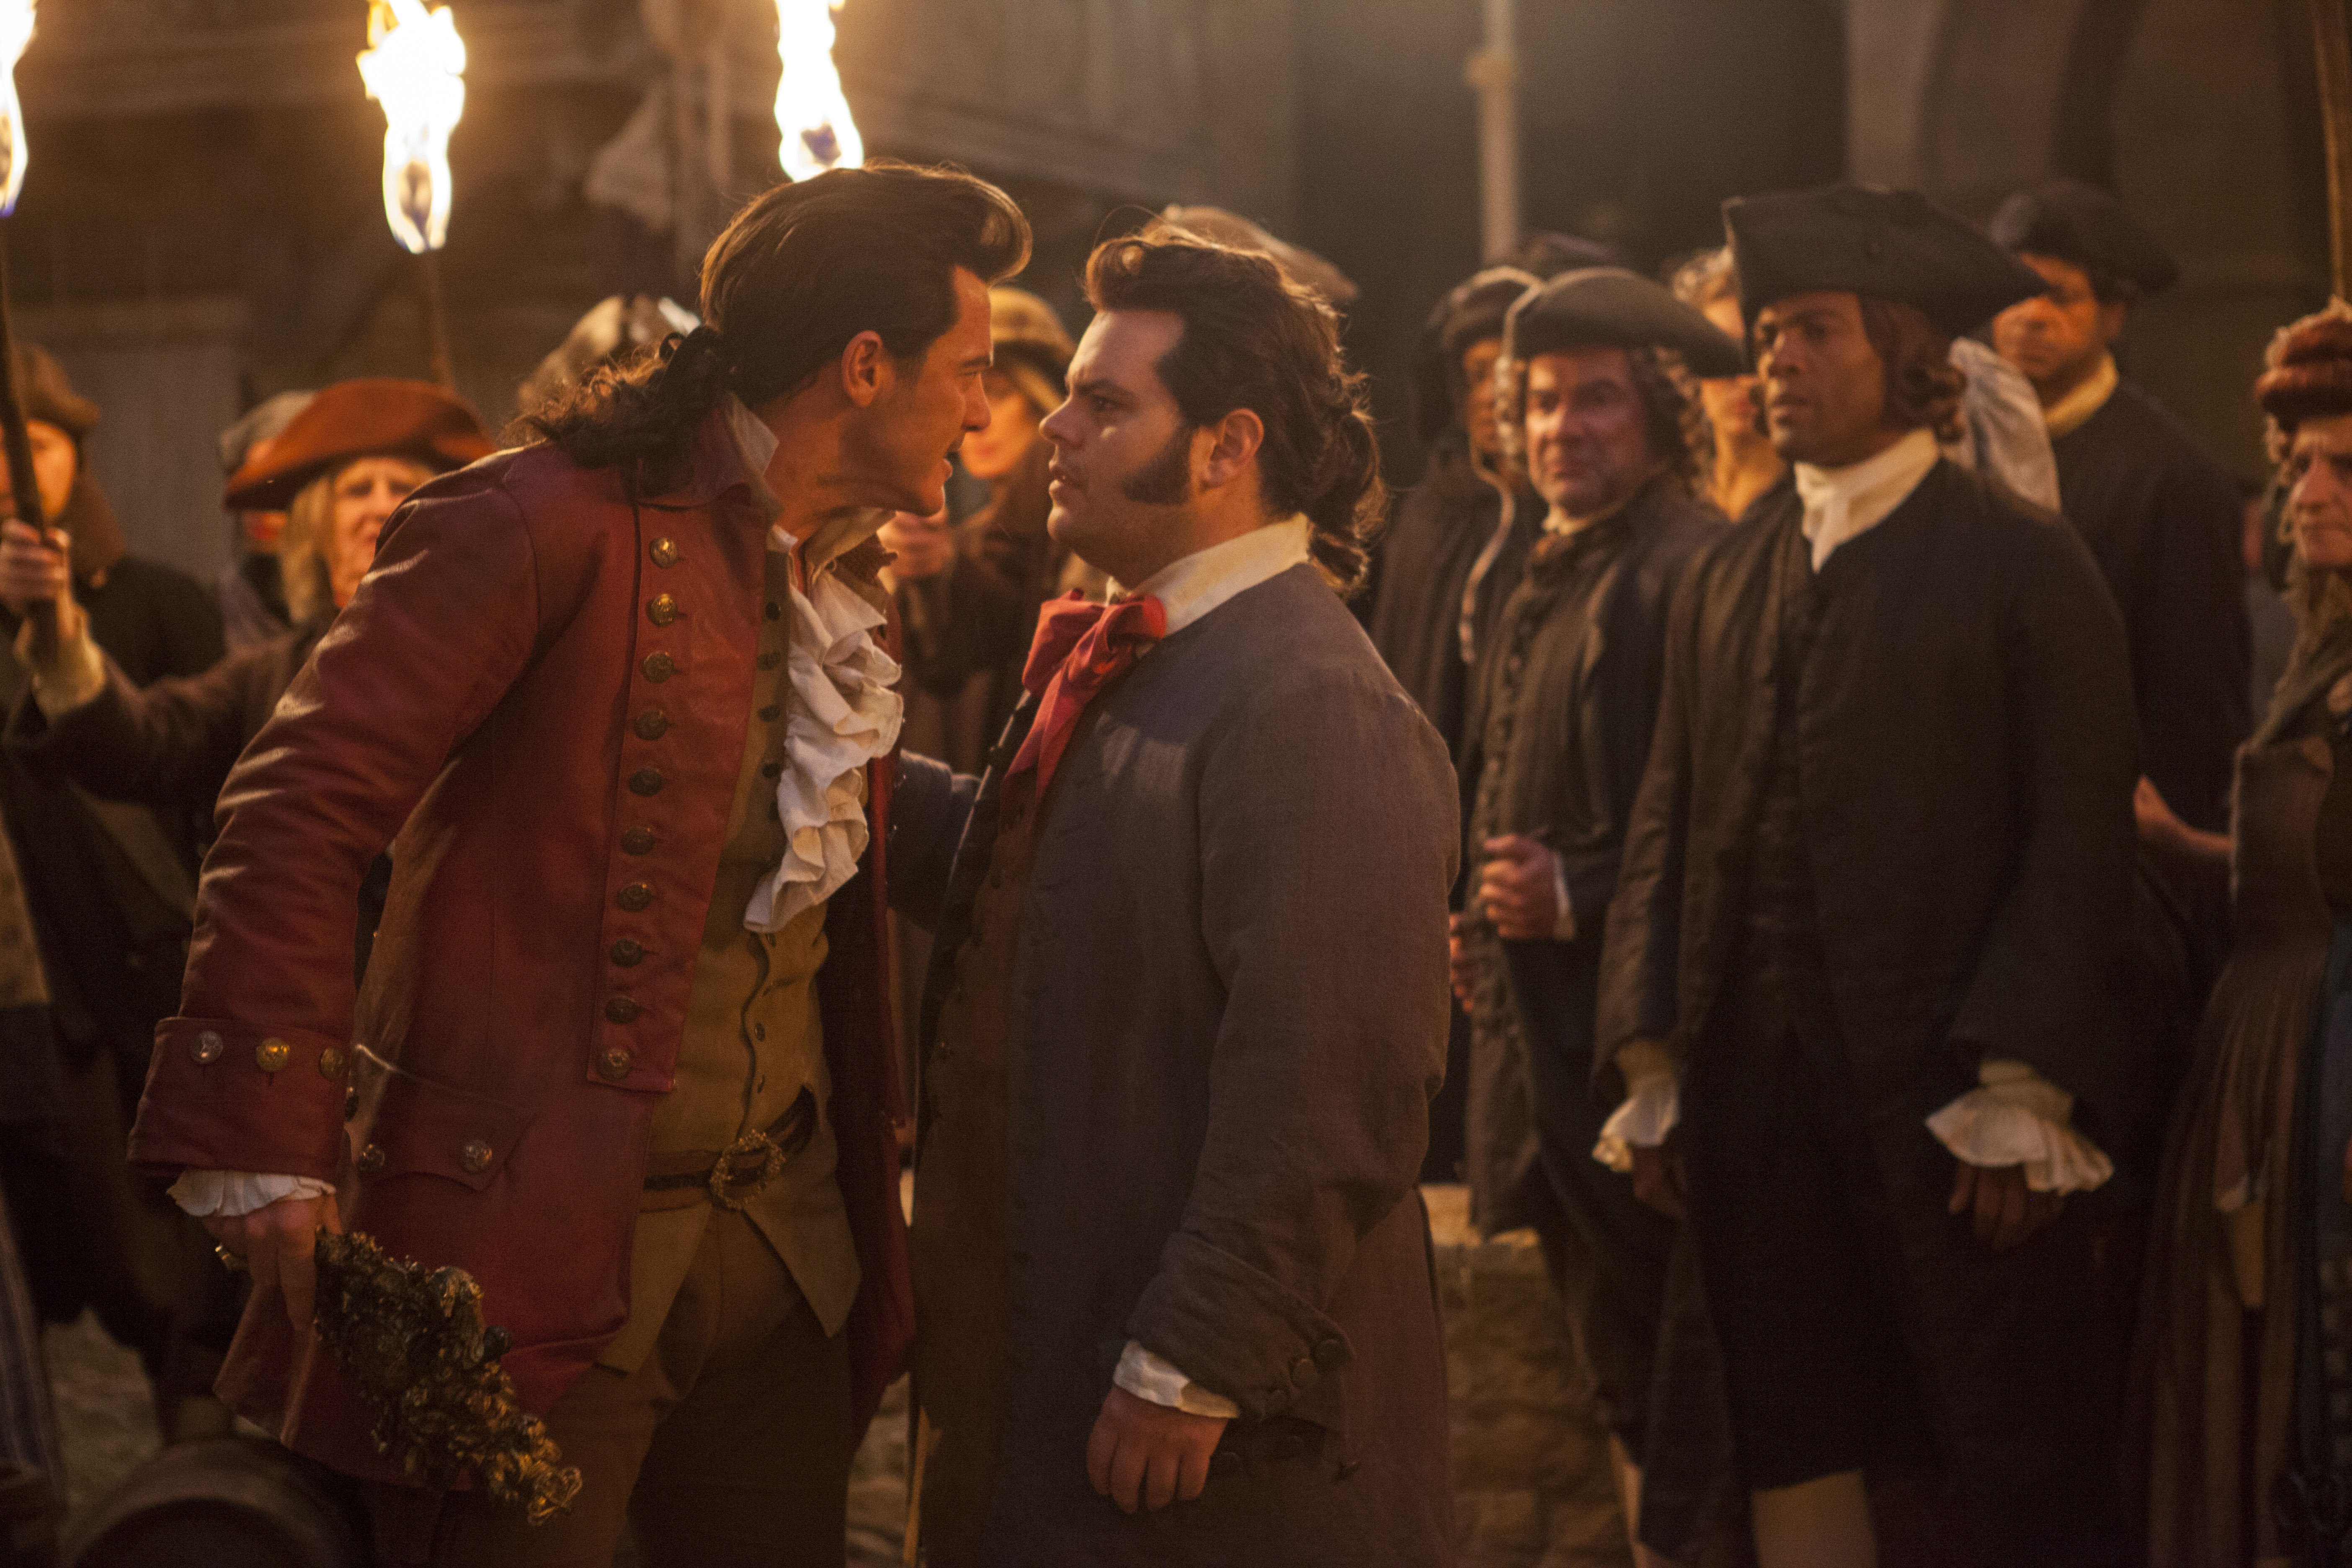 Gaston (Luke Evans) stares down LeFou (Josh Gad) in a screenshot from Beauty and the Beast